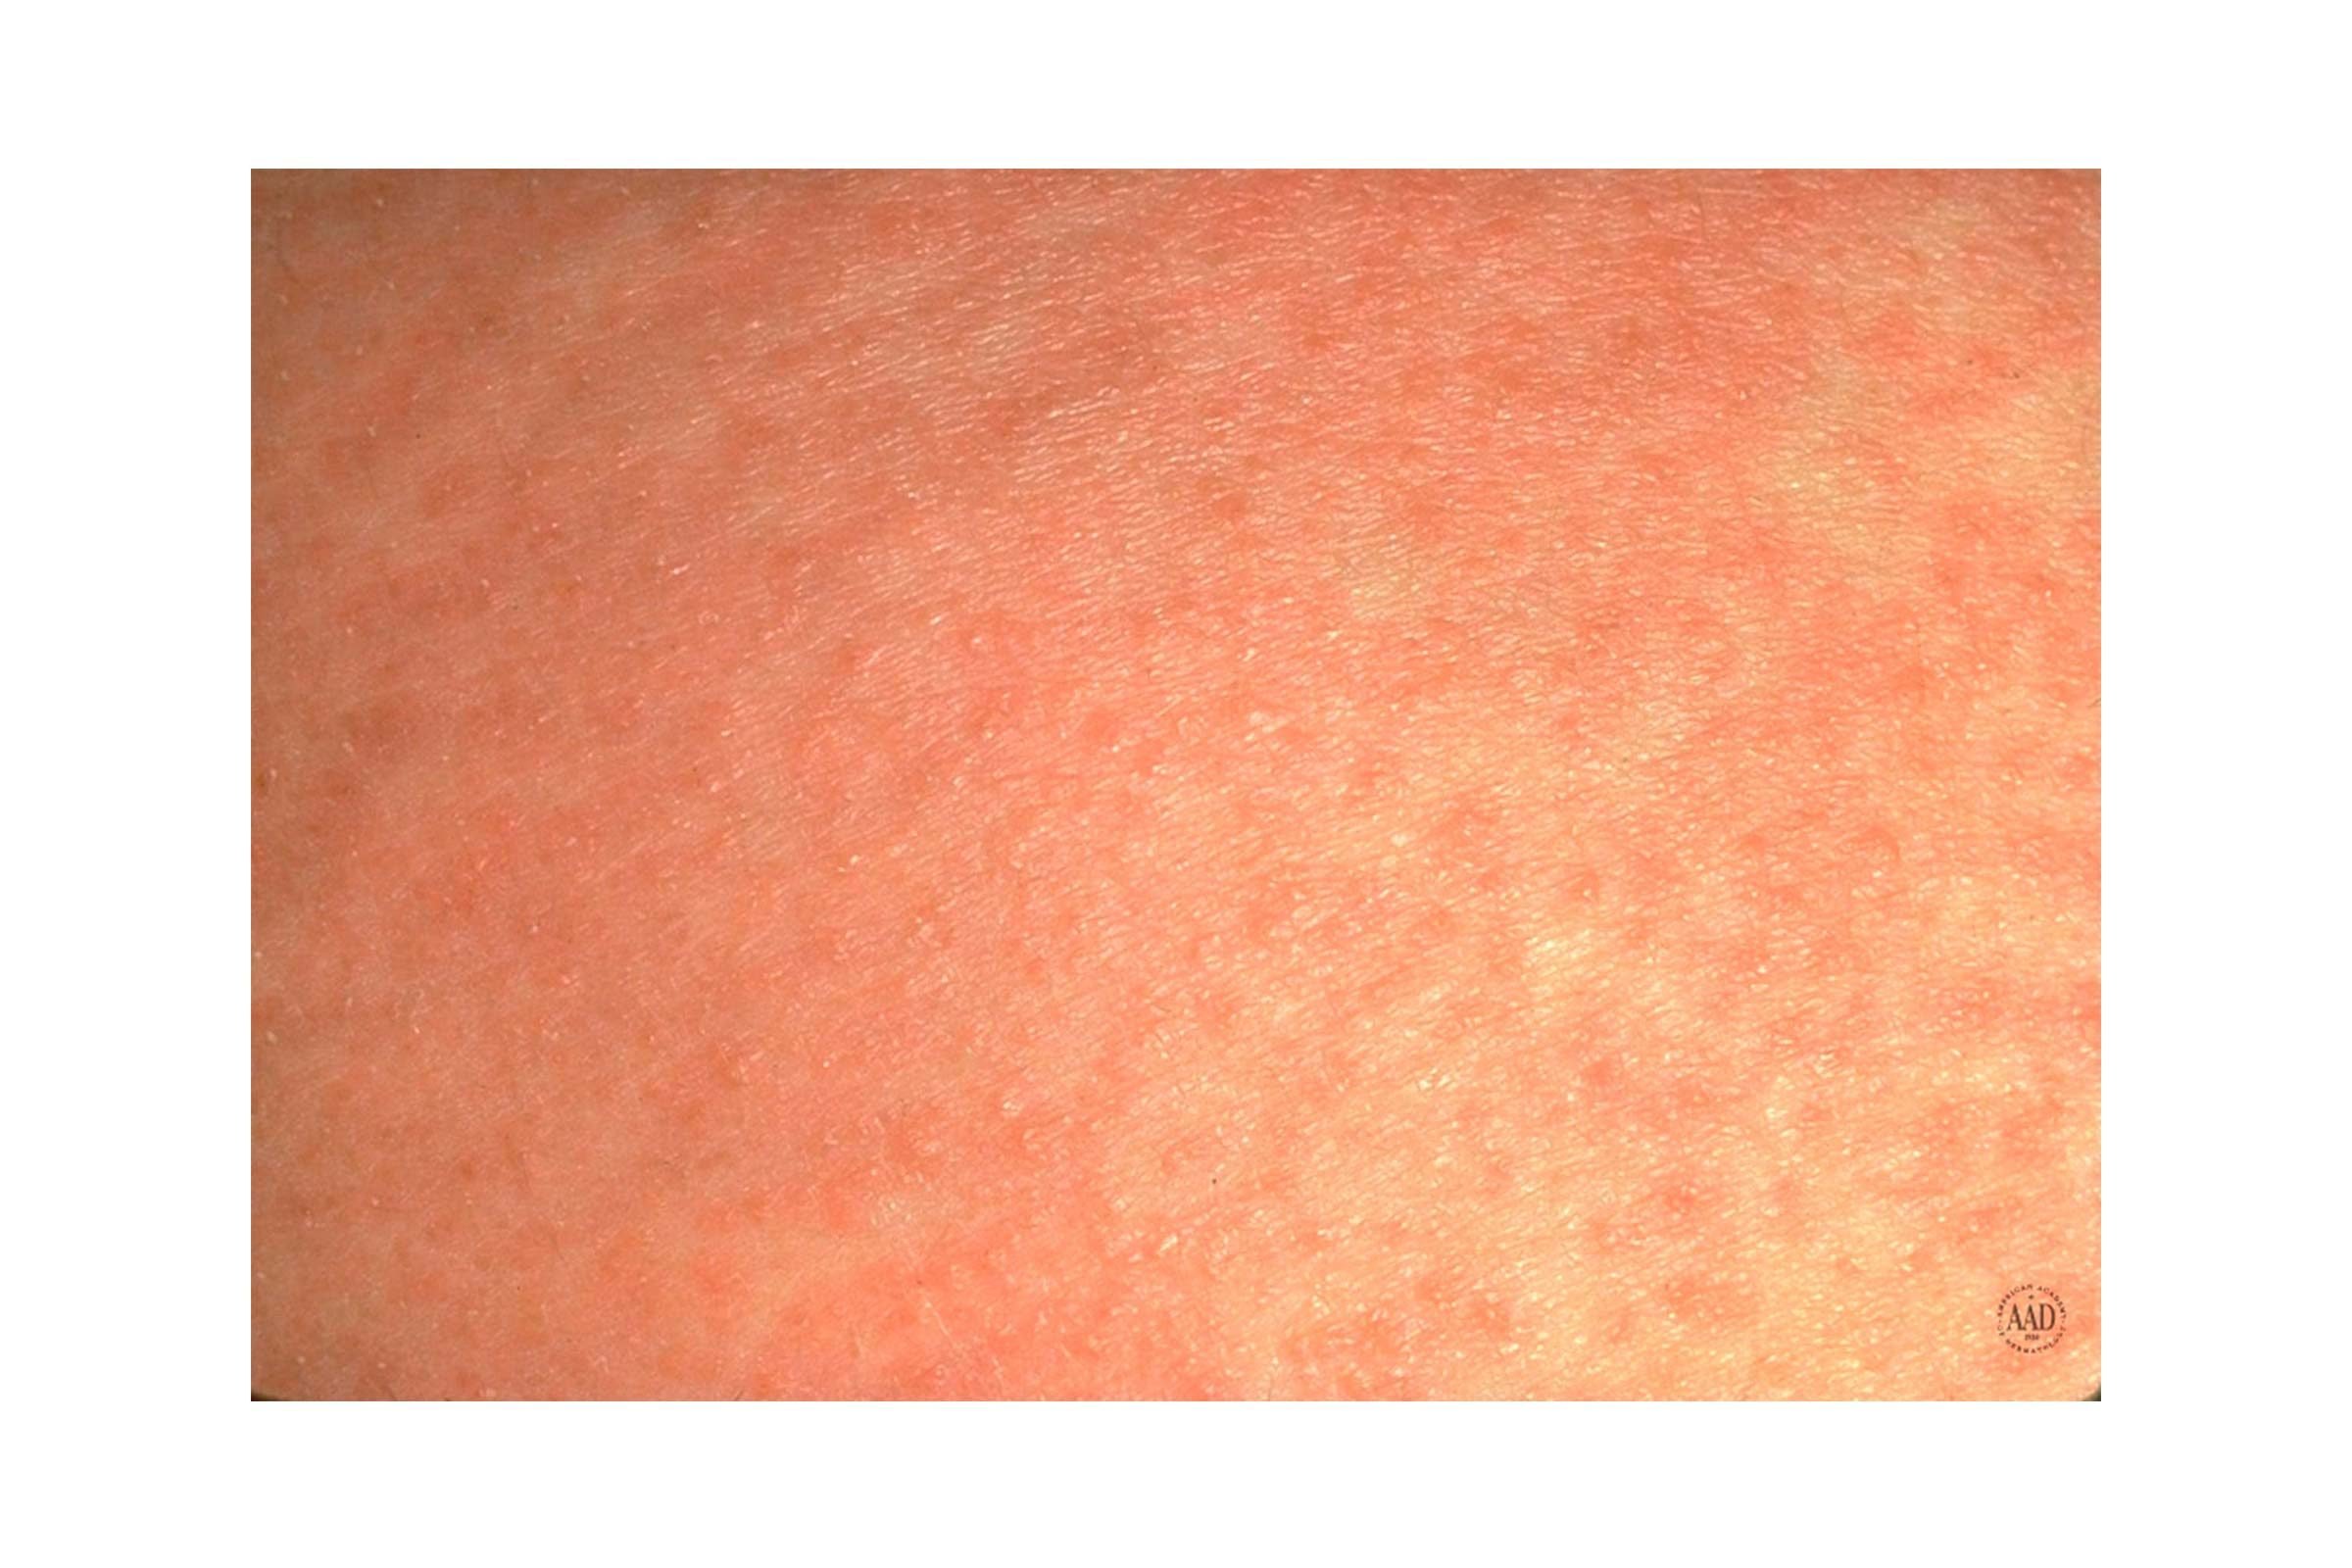 What’s That Rash? How to ID 14 of the Most Common Skin Irritations